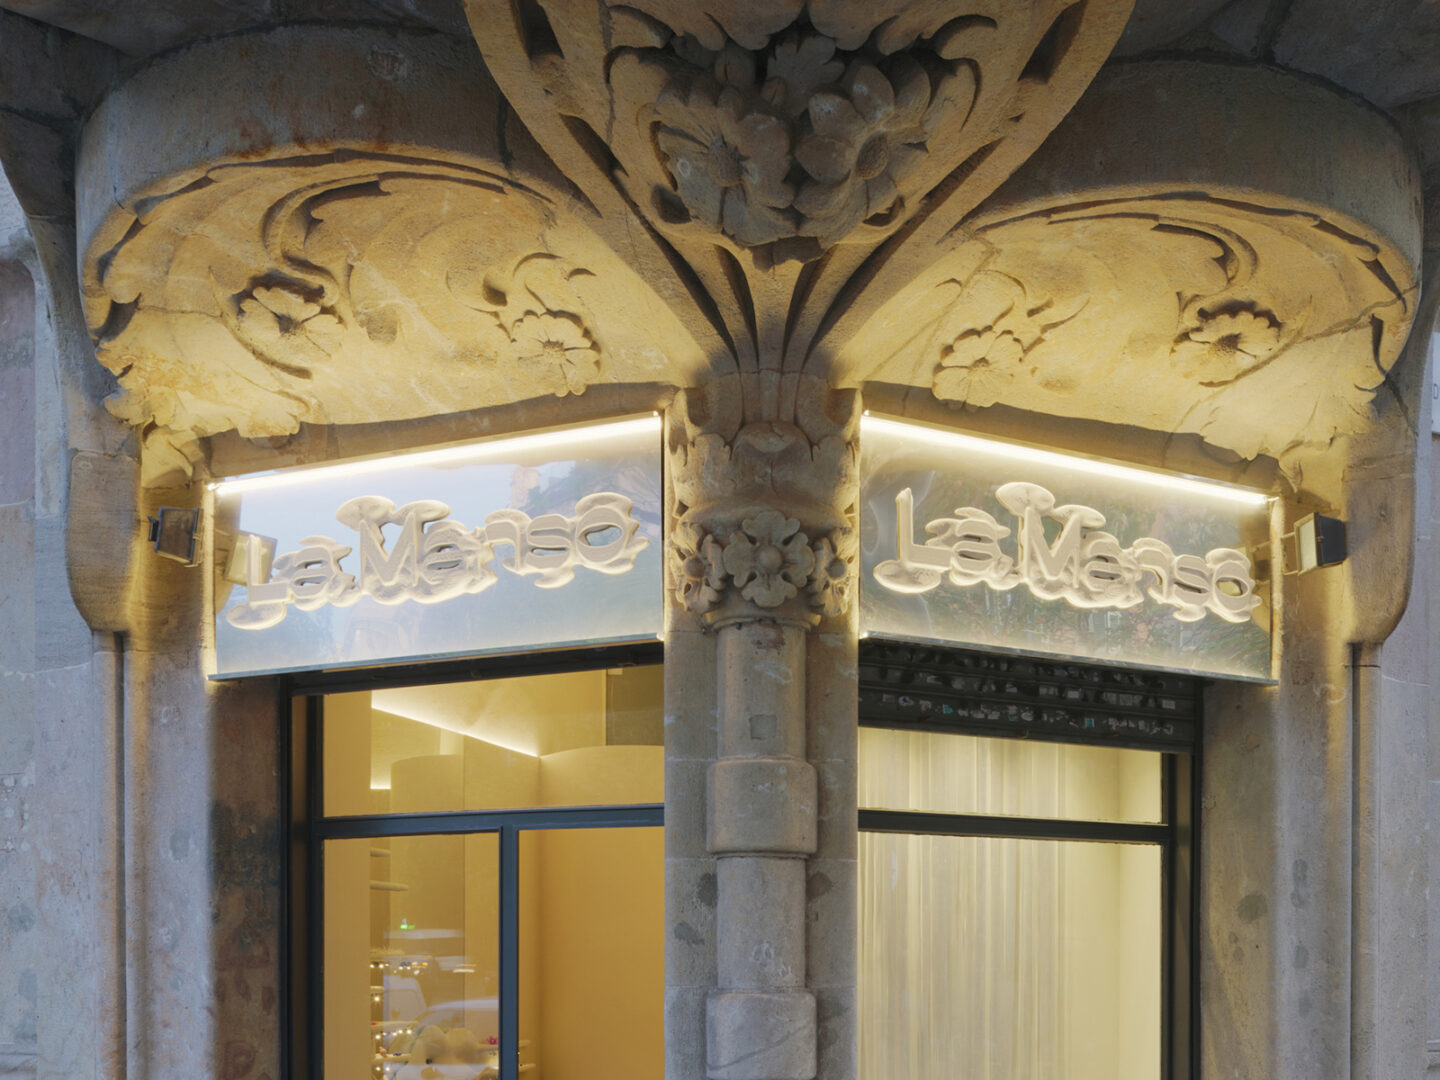 La manso opens the doors of its first flagship store in Barcelona